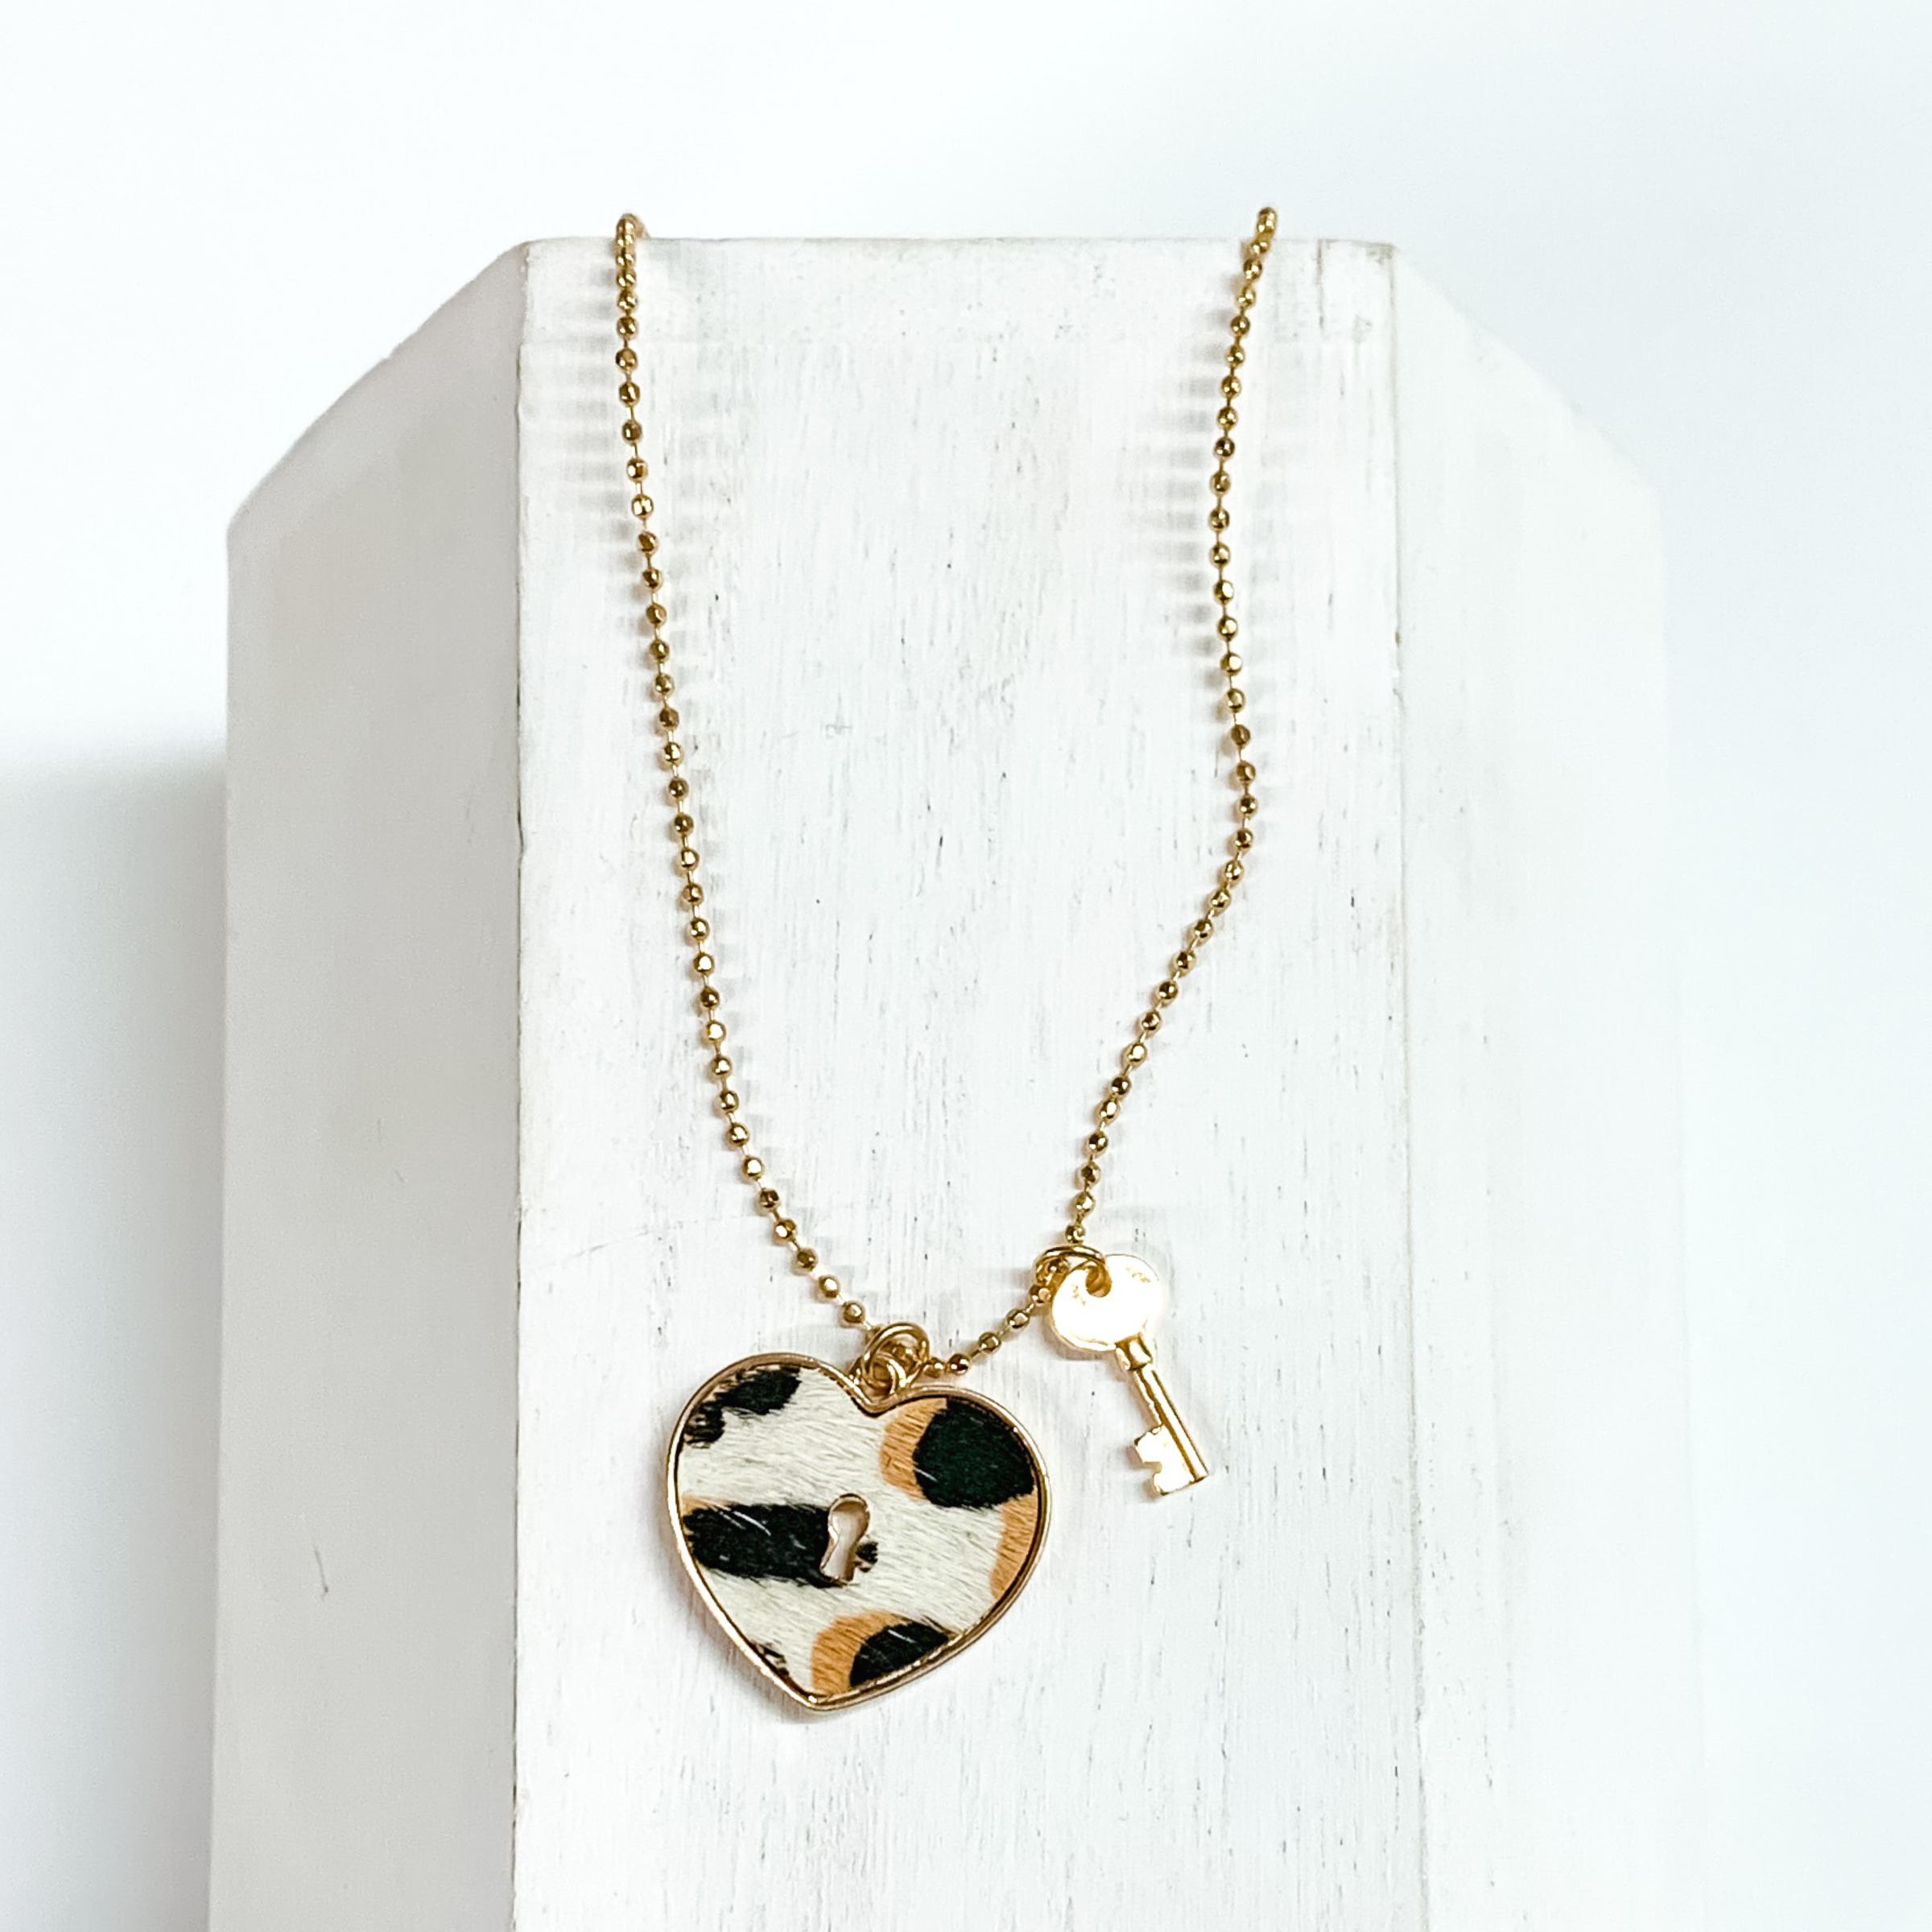 Gold, ball chain necklace with a white leopard print heart pendant and gold key charm. This necklace is pictured on a white block on a white background.